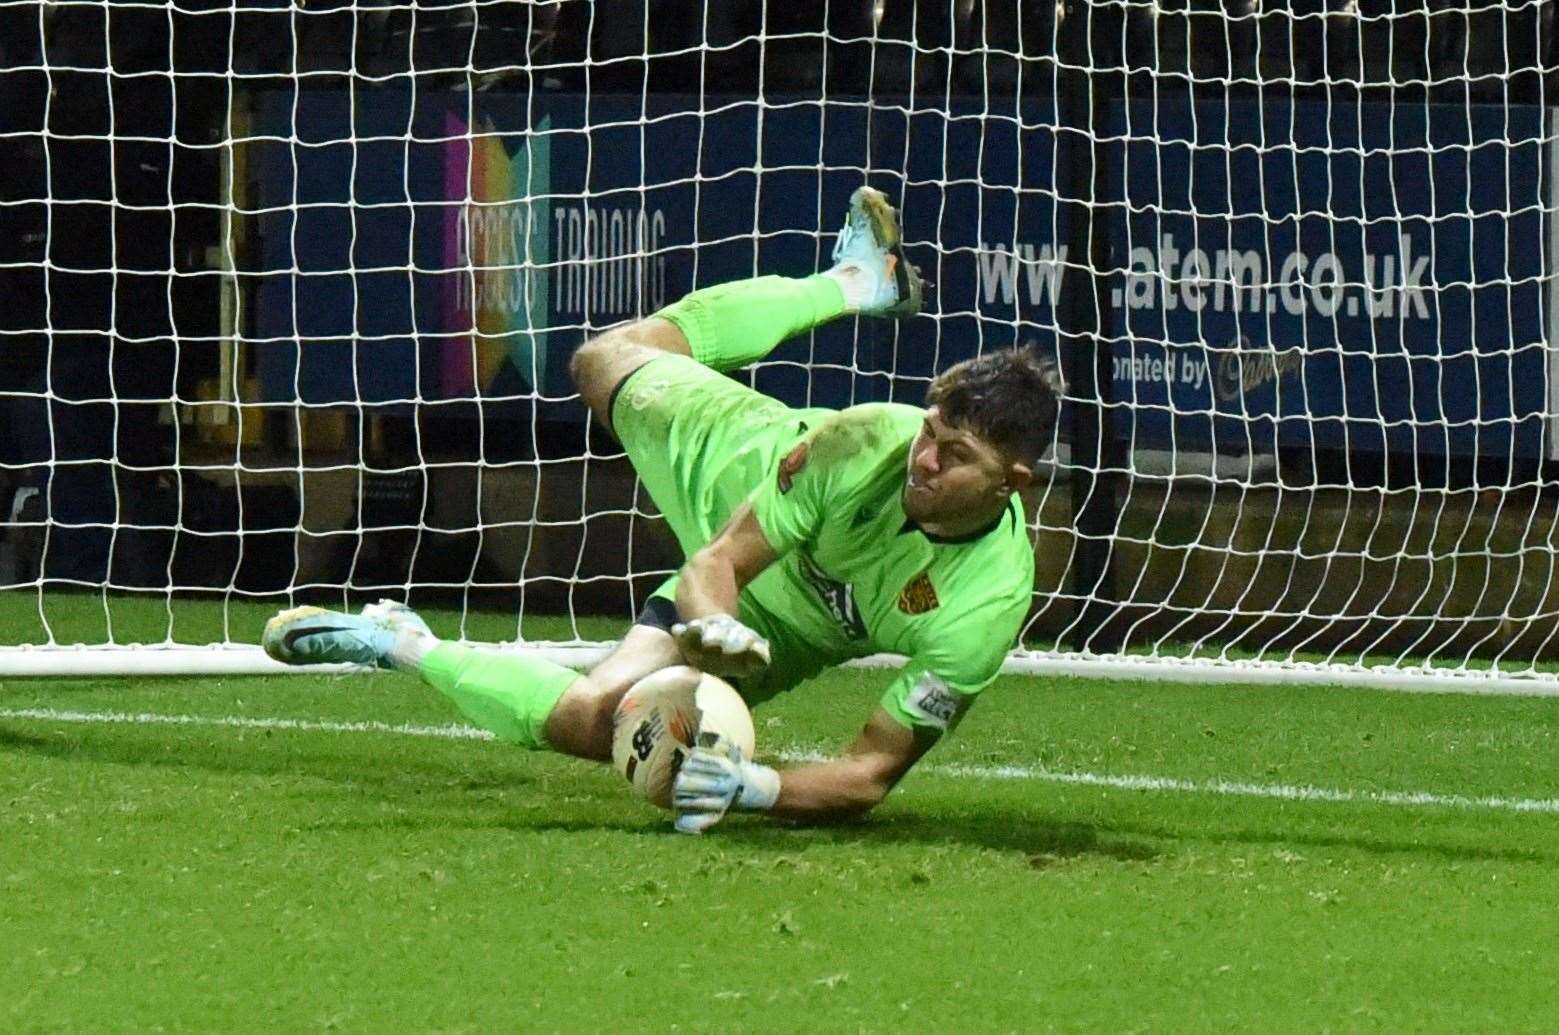 Tom Hadler makes the winning penalty save at Notts County. Picture: Steve Terrell